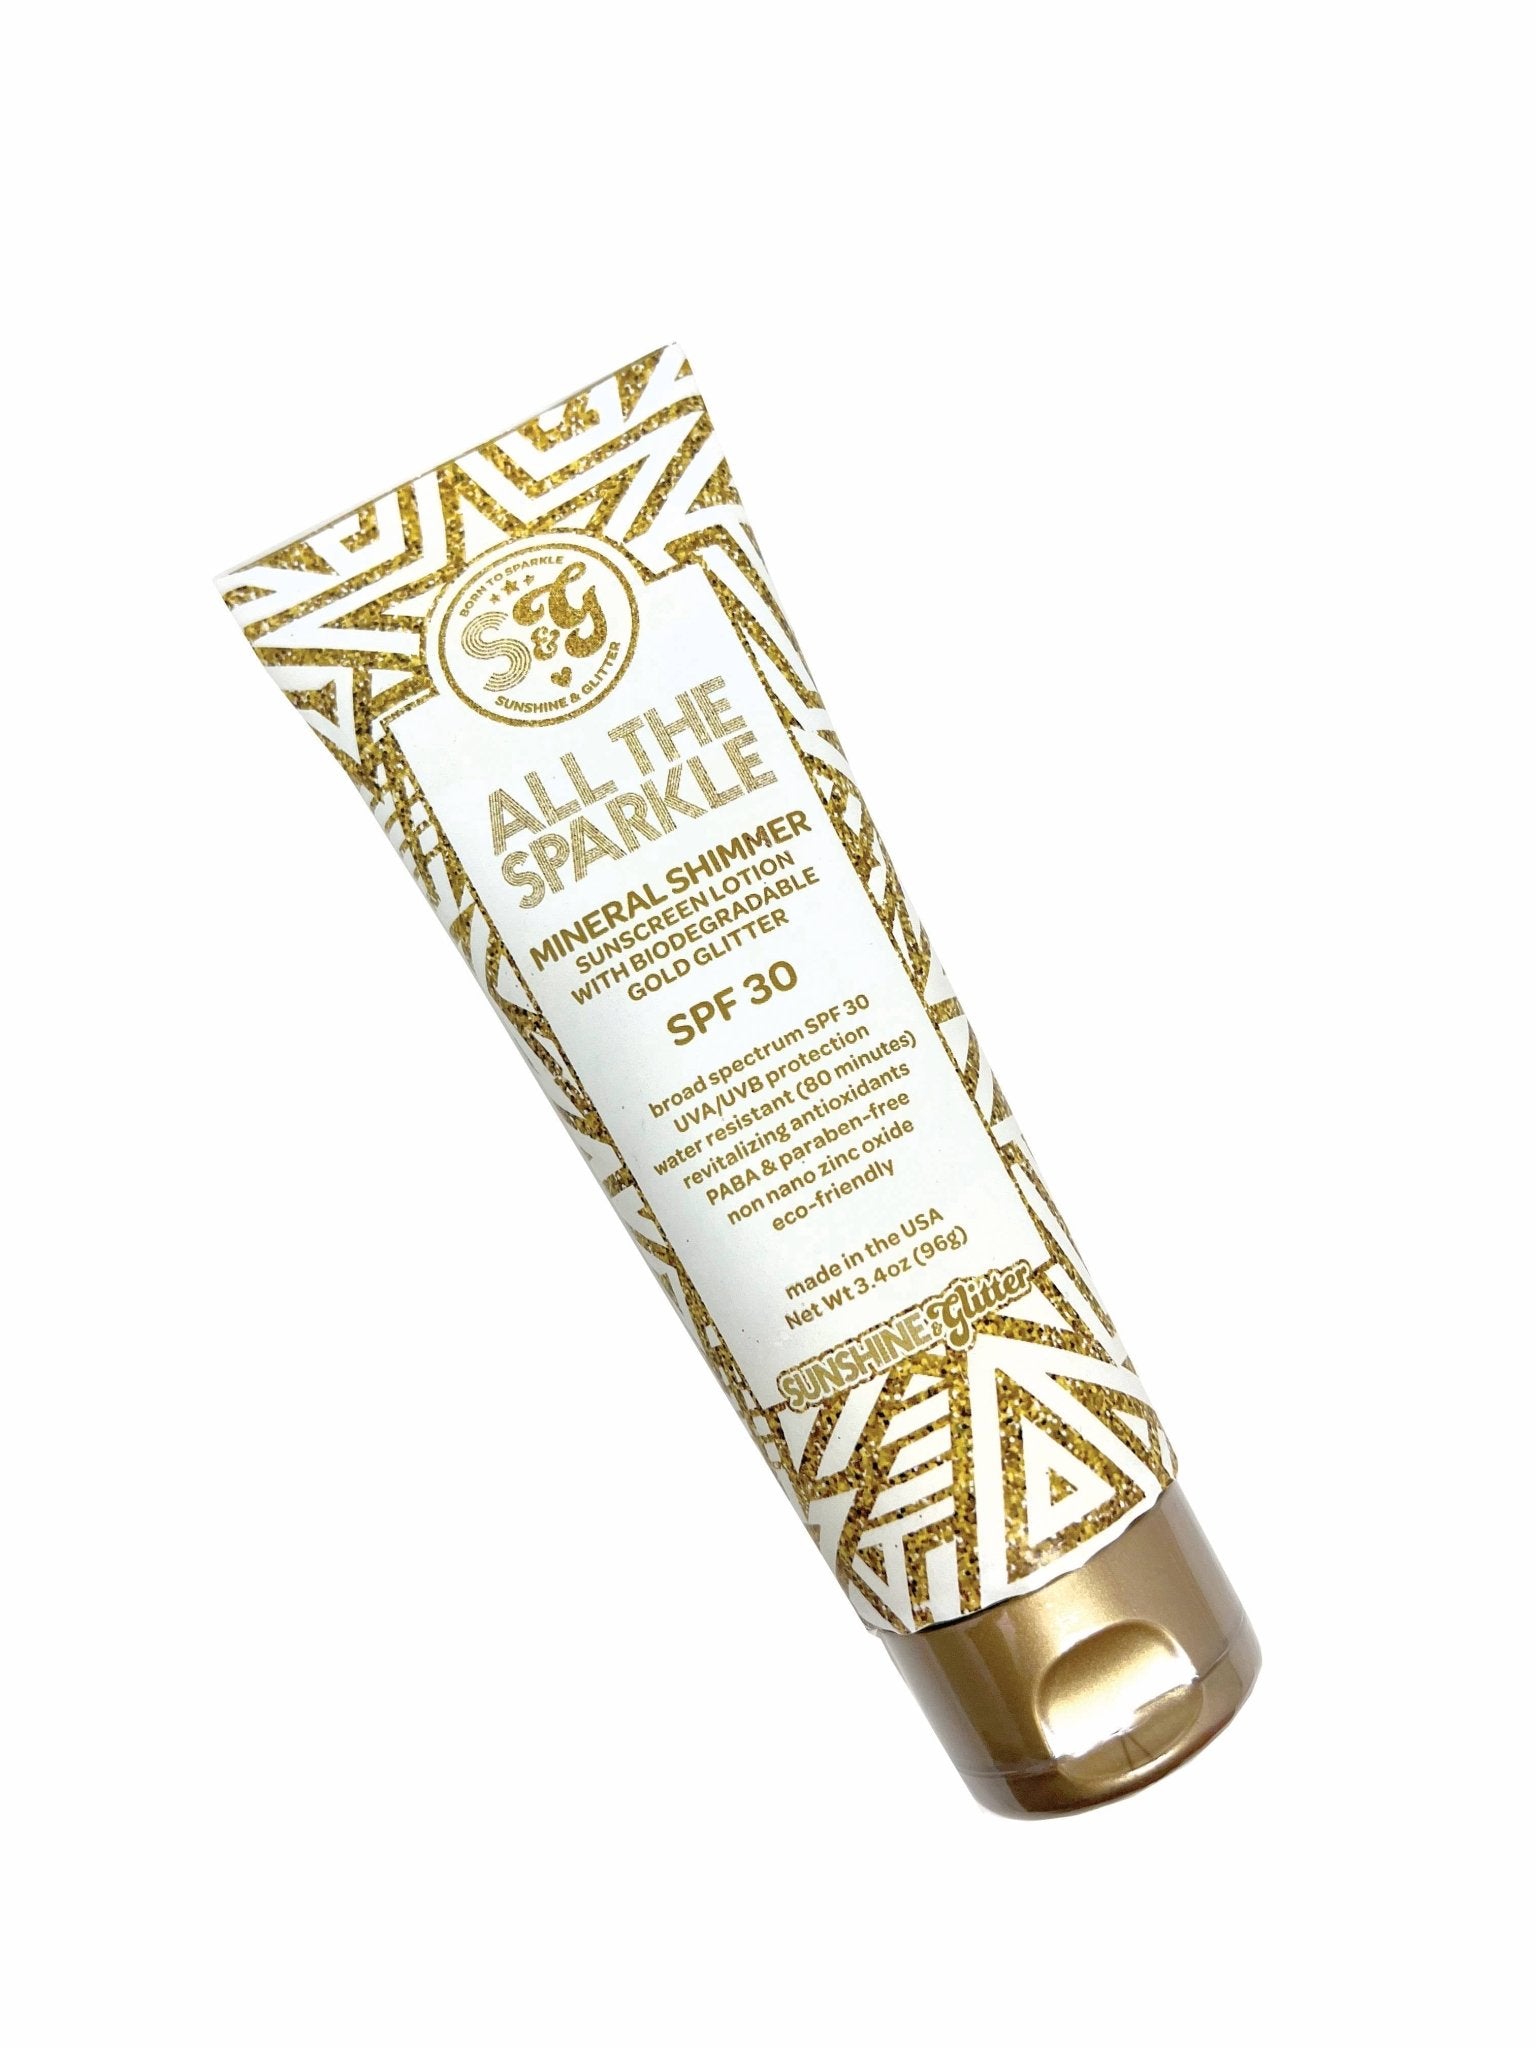 All the Sparkle Mineral Shimmer Sunscreen SPF 30 - Spiral Circle